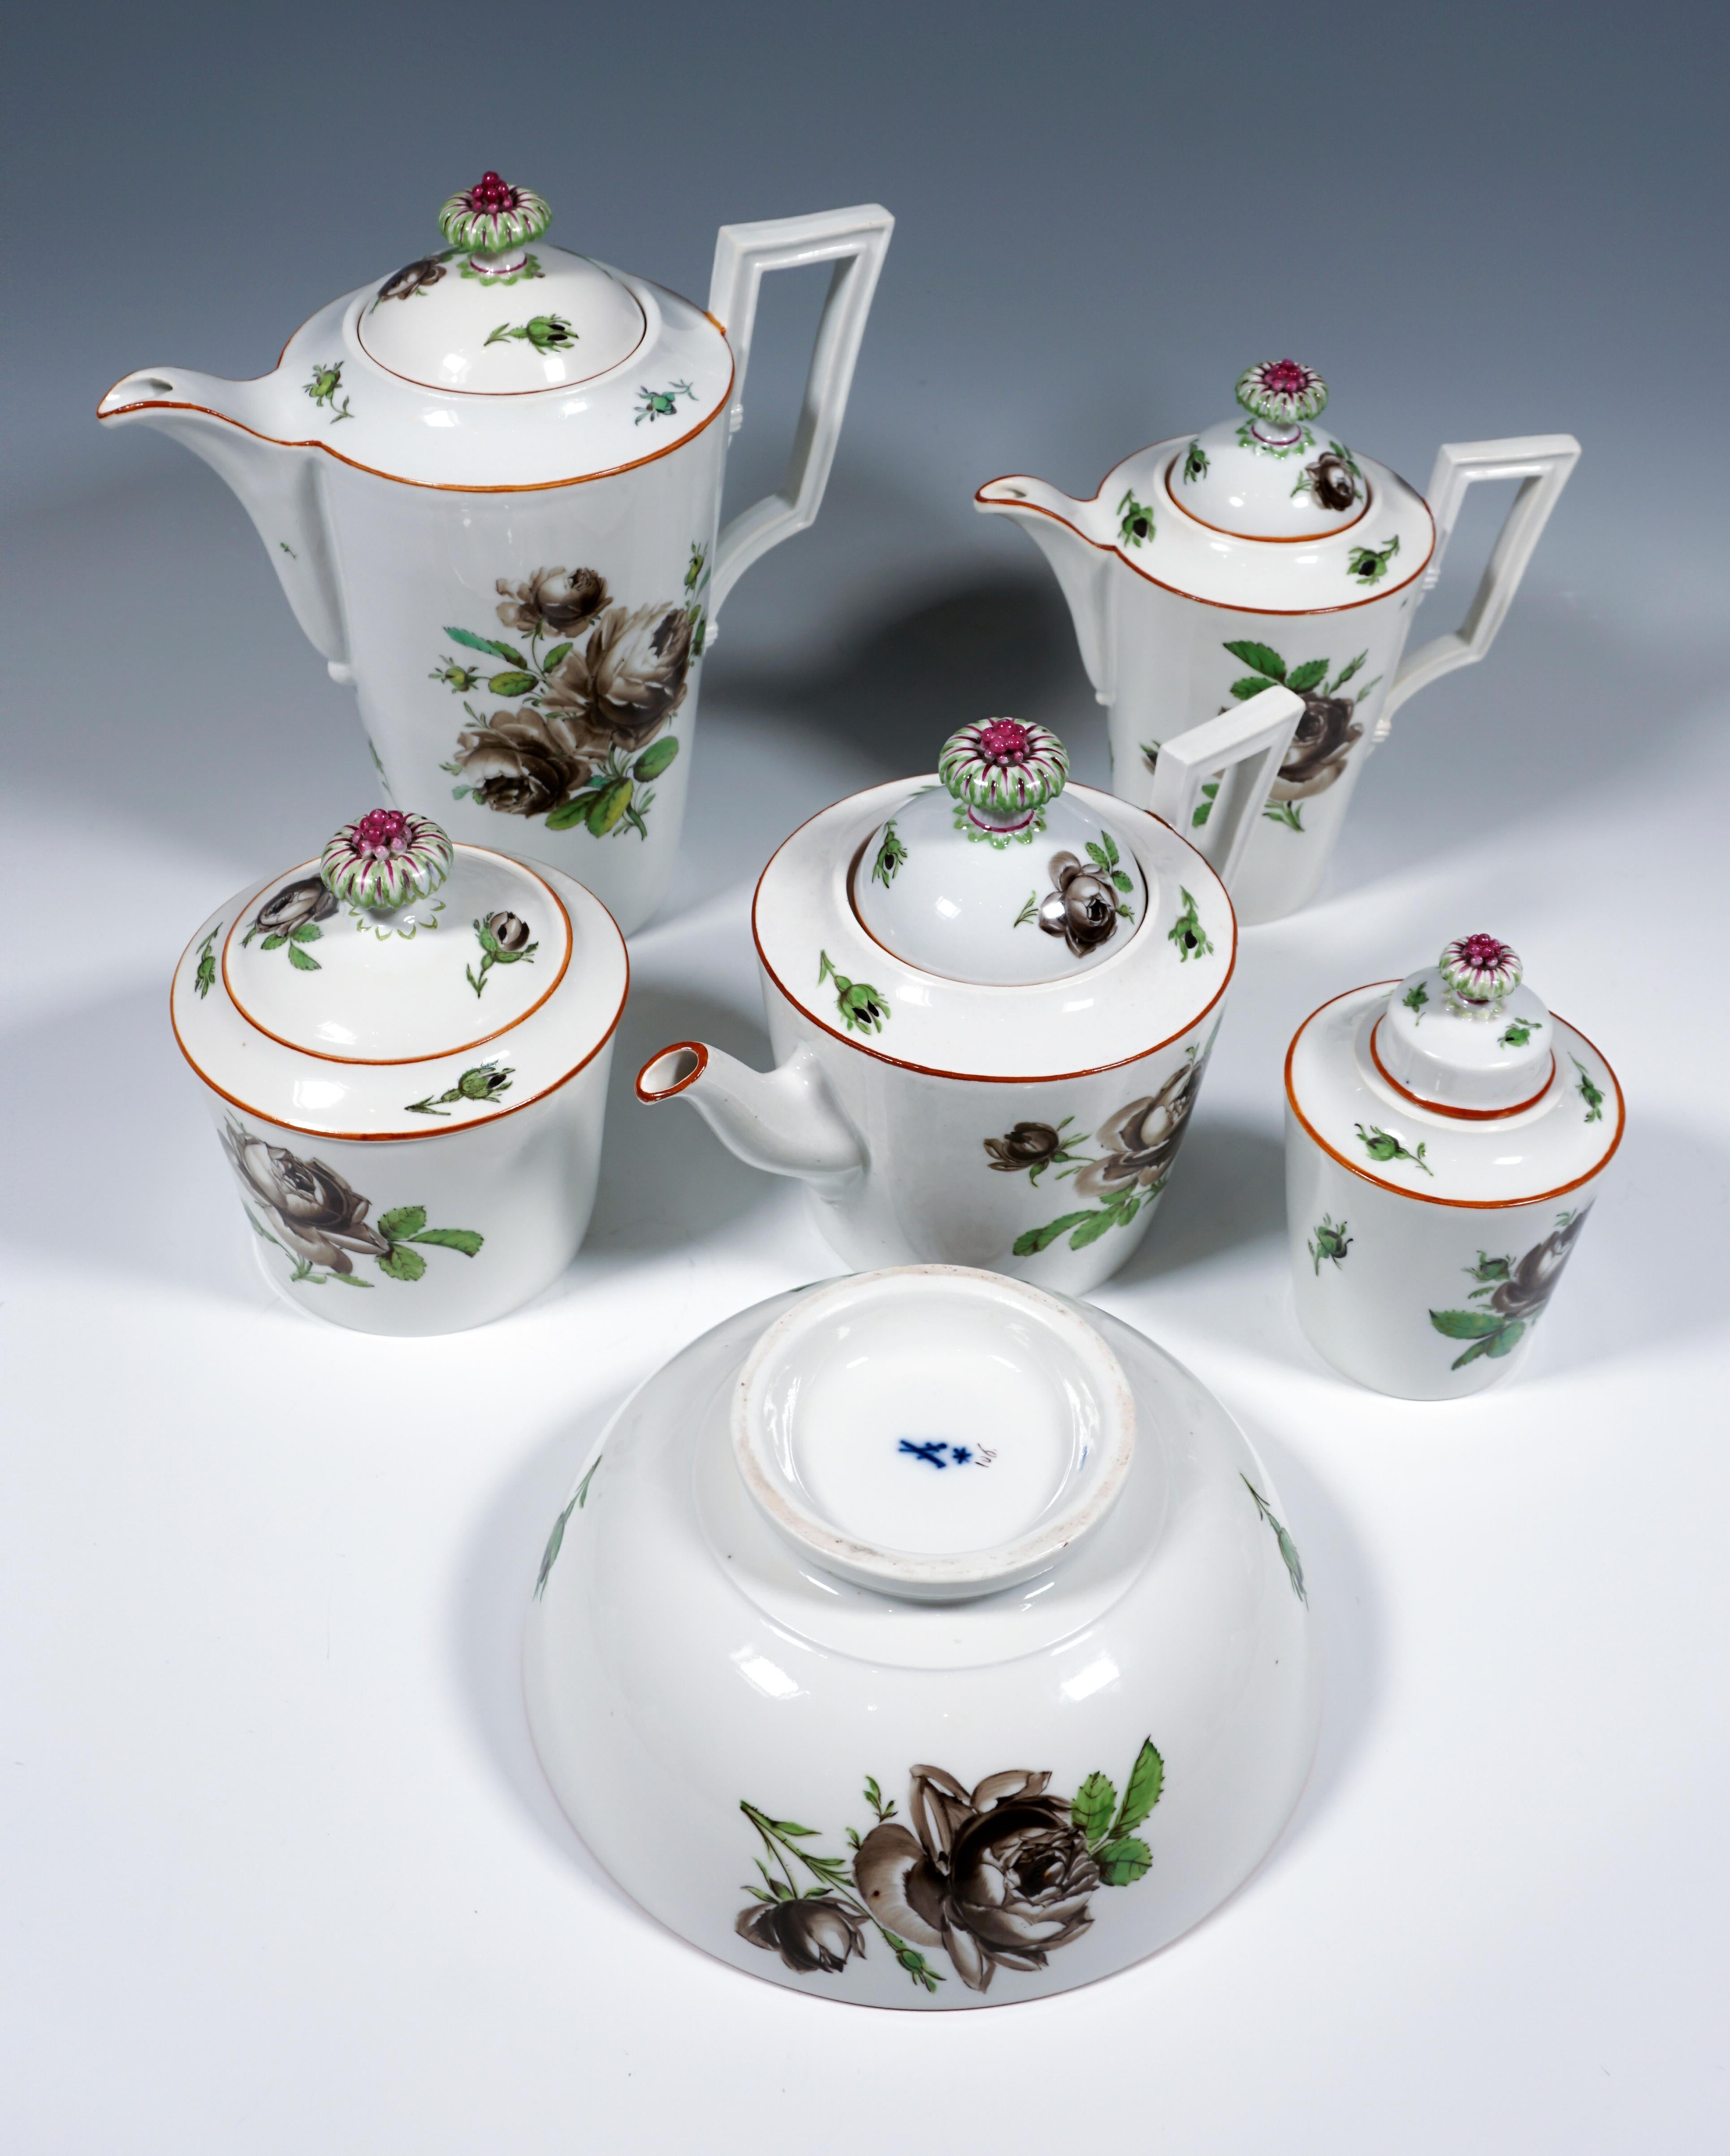 Baroque 18th Century Meissen Coffee & Tea Set for 9 Persons with Black Rose Decor